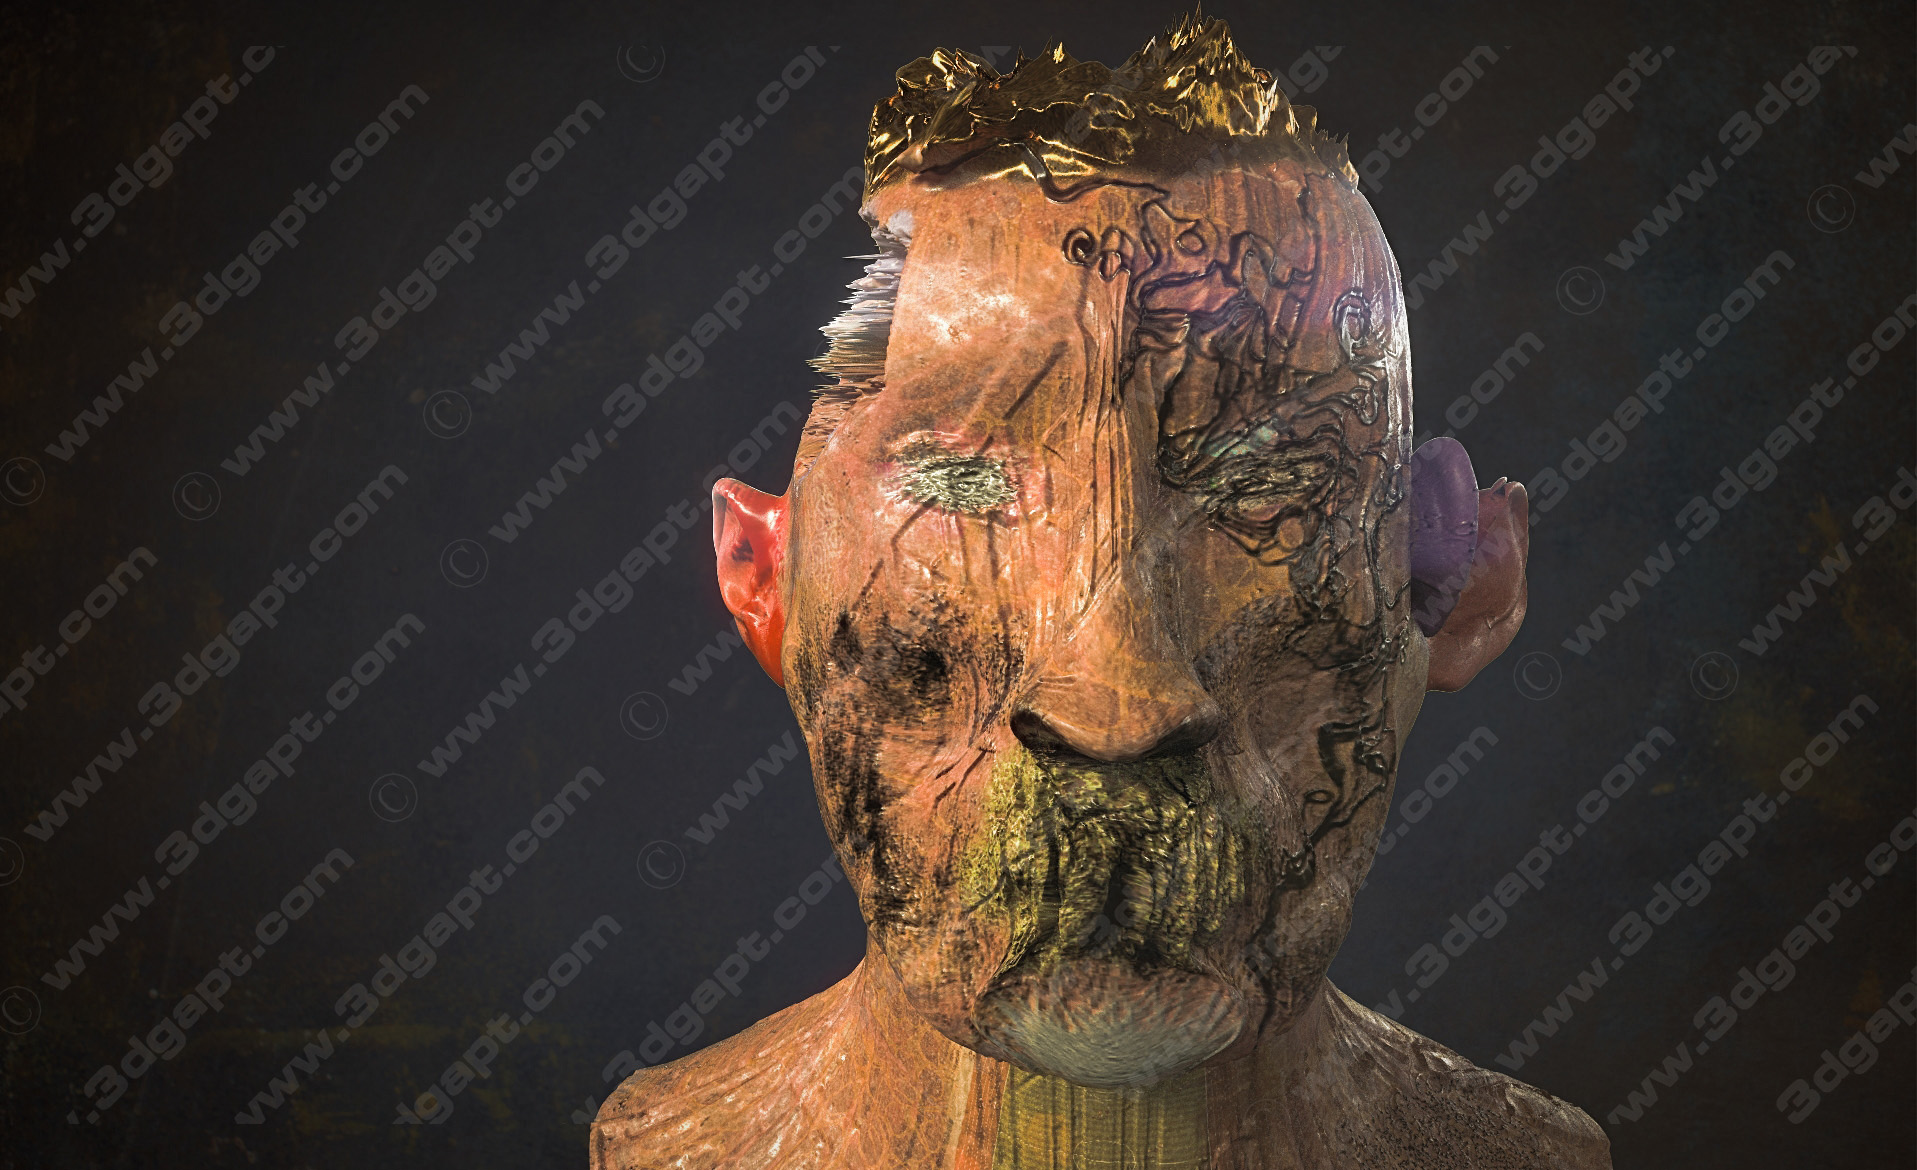 3D characters - Monster's ugly face